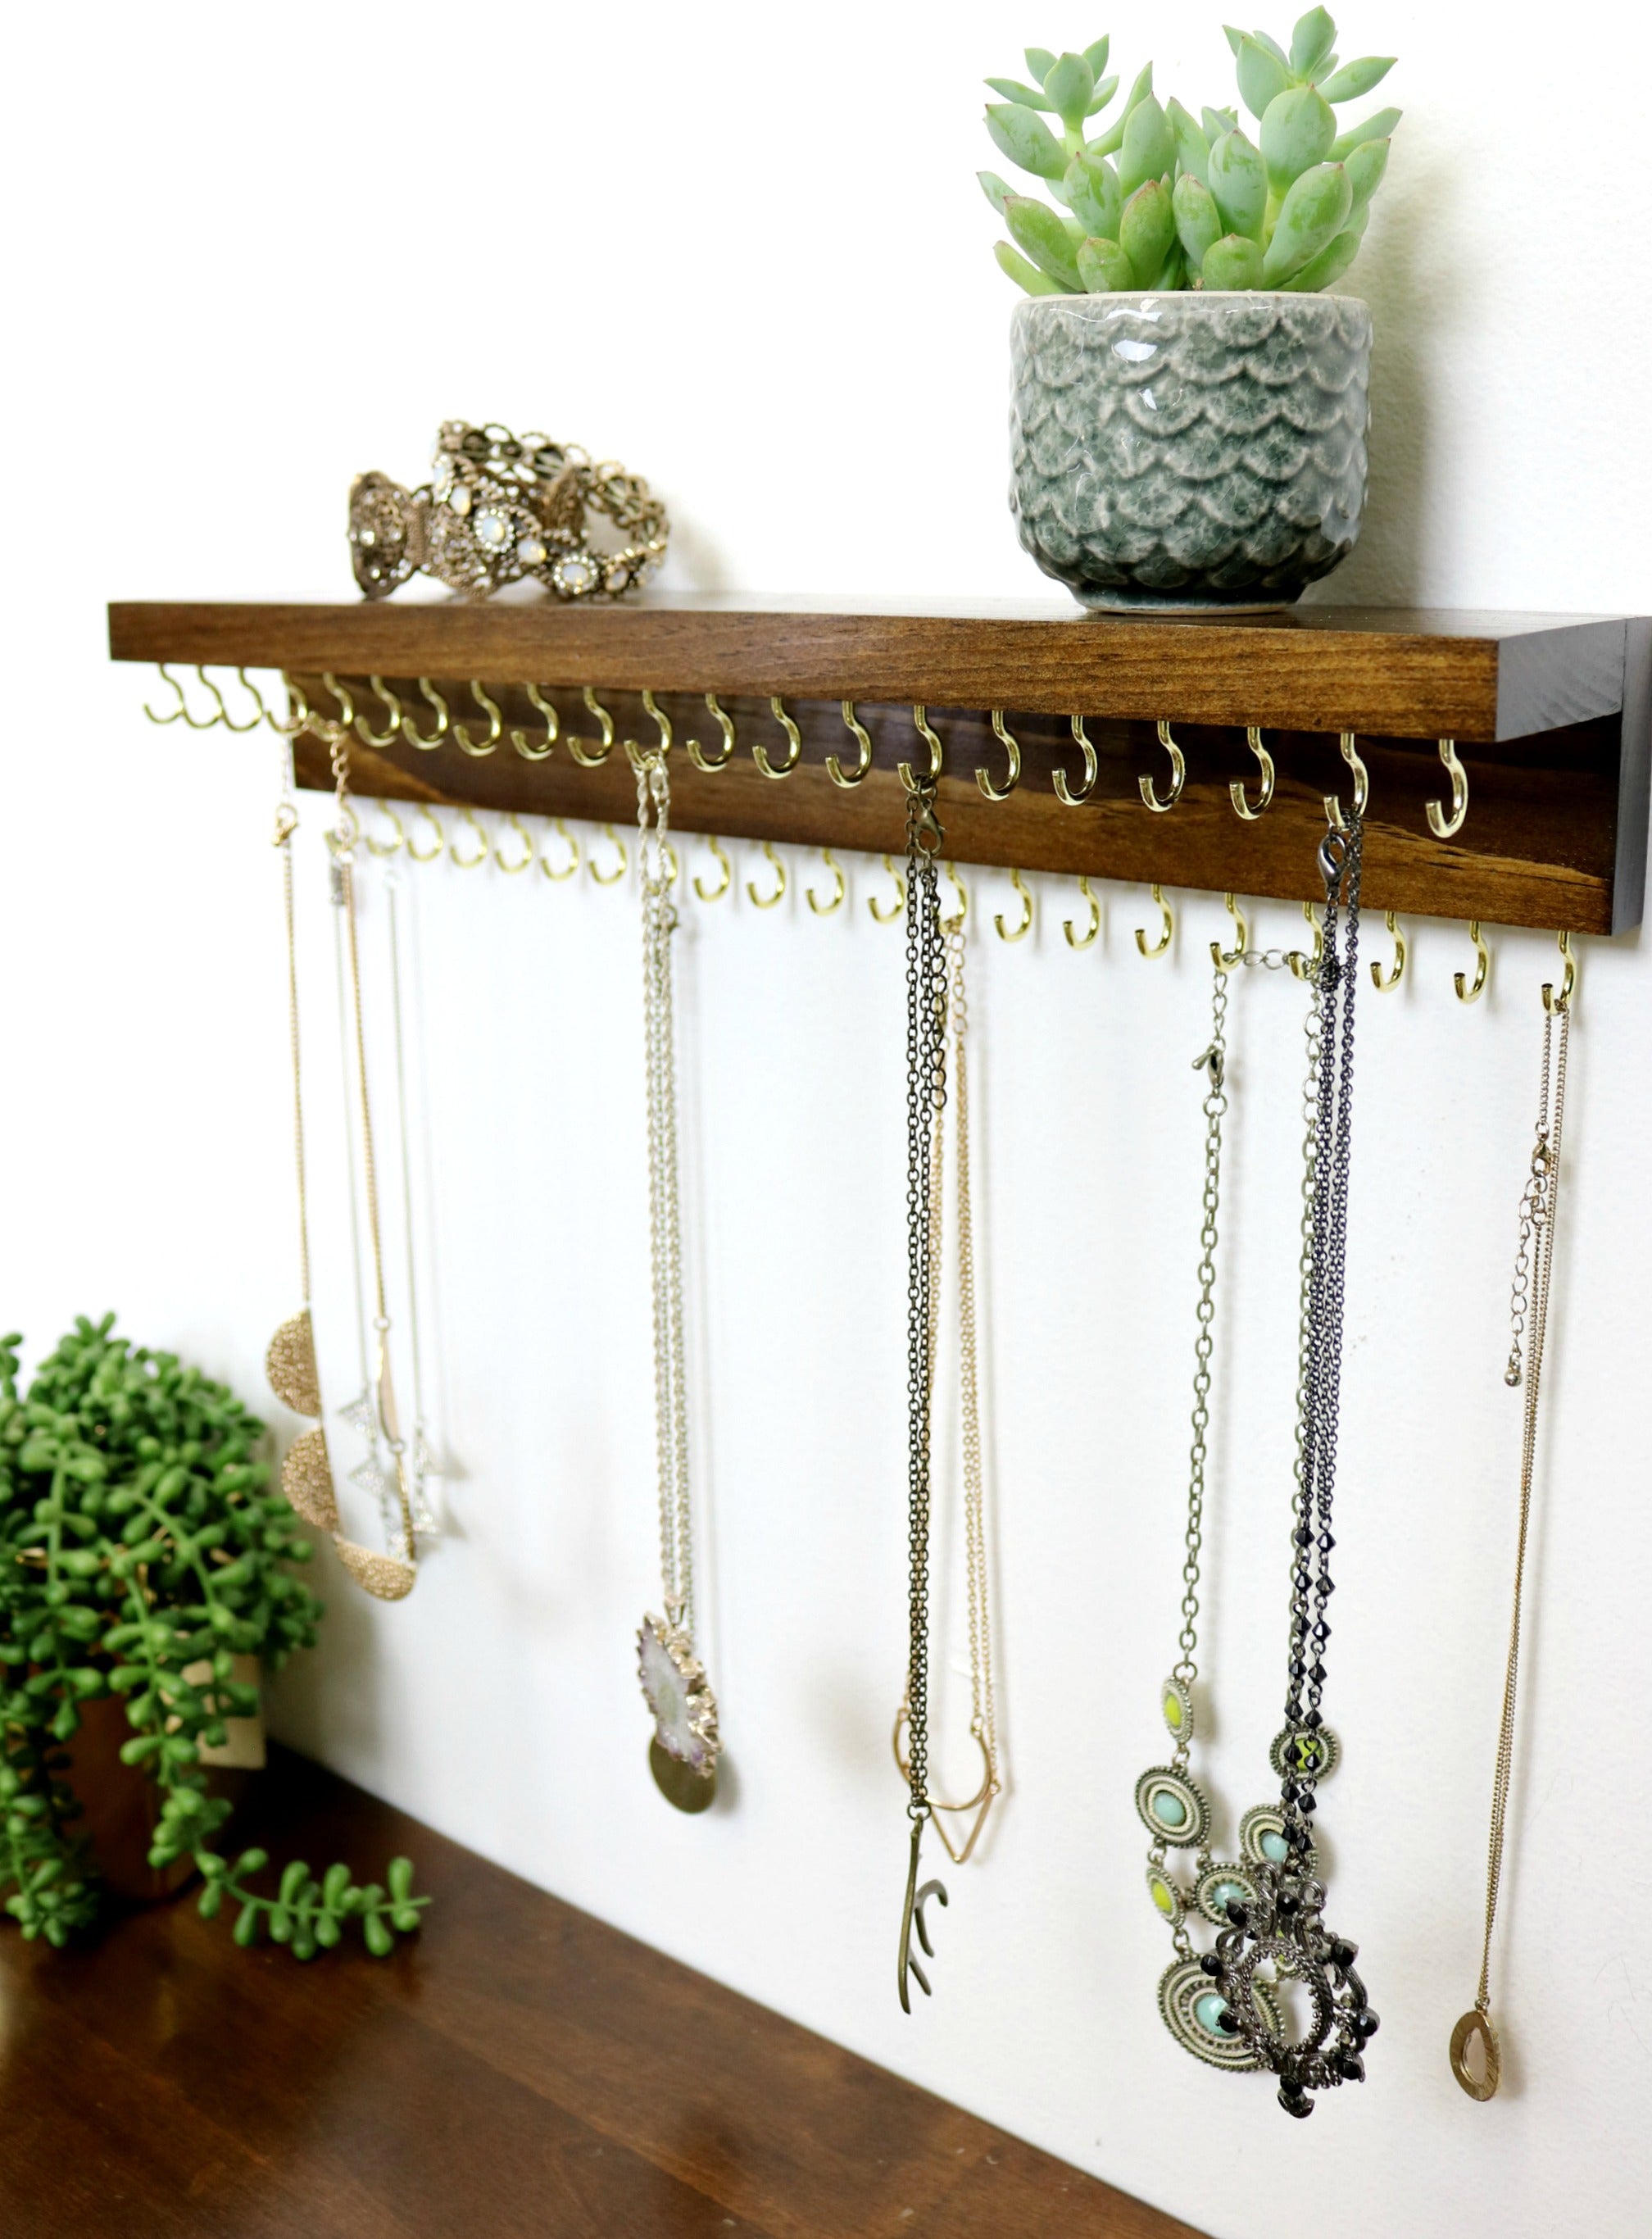 Jewelry Organizer With Shelf  Necklace Holder, Bracelet and Earring H –  The Knotted Wood